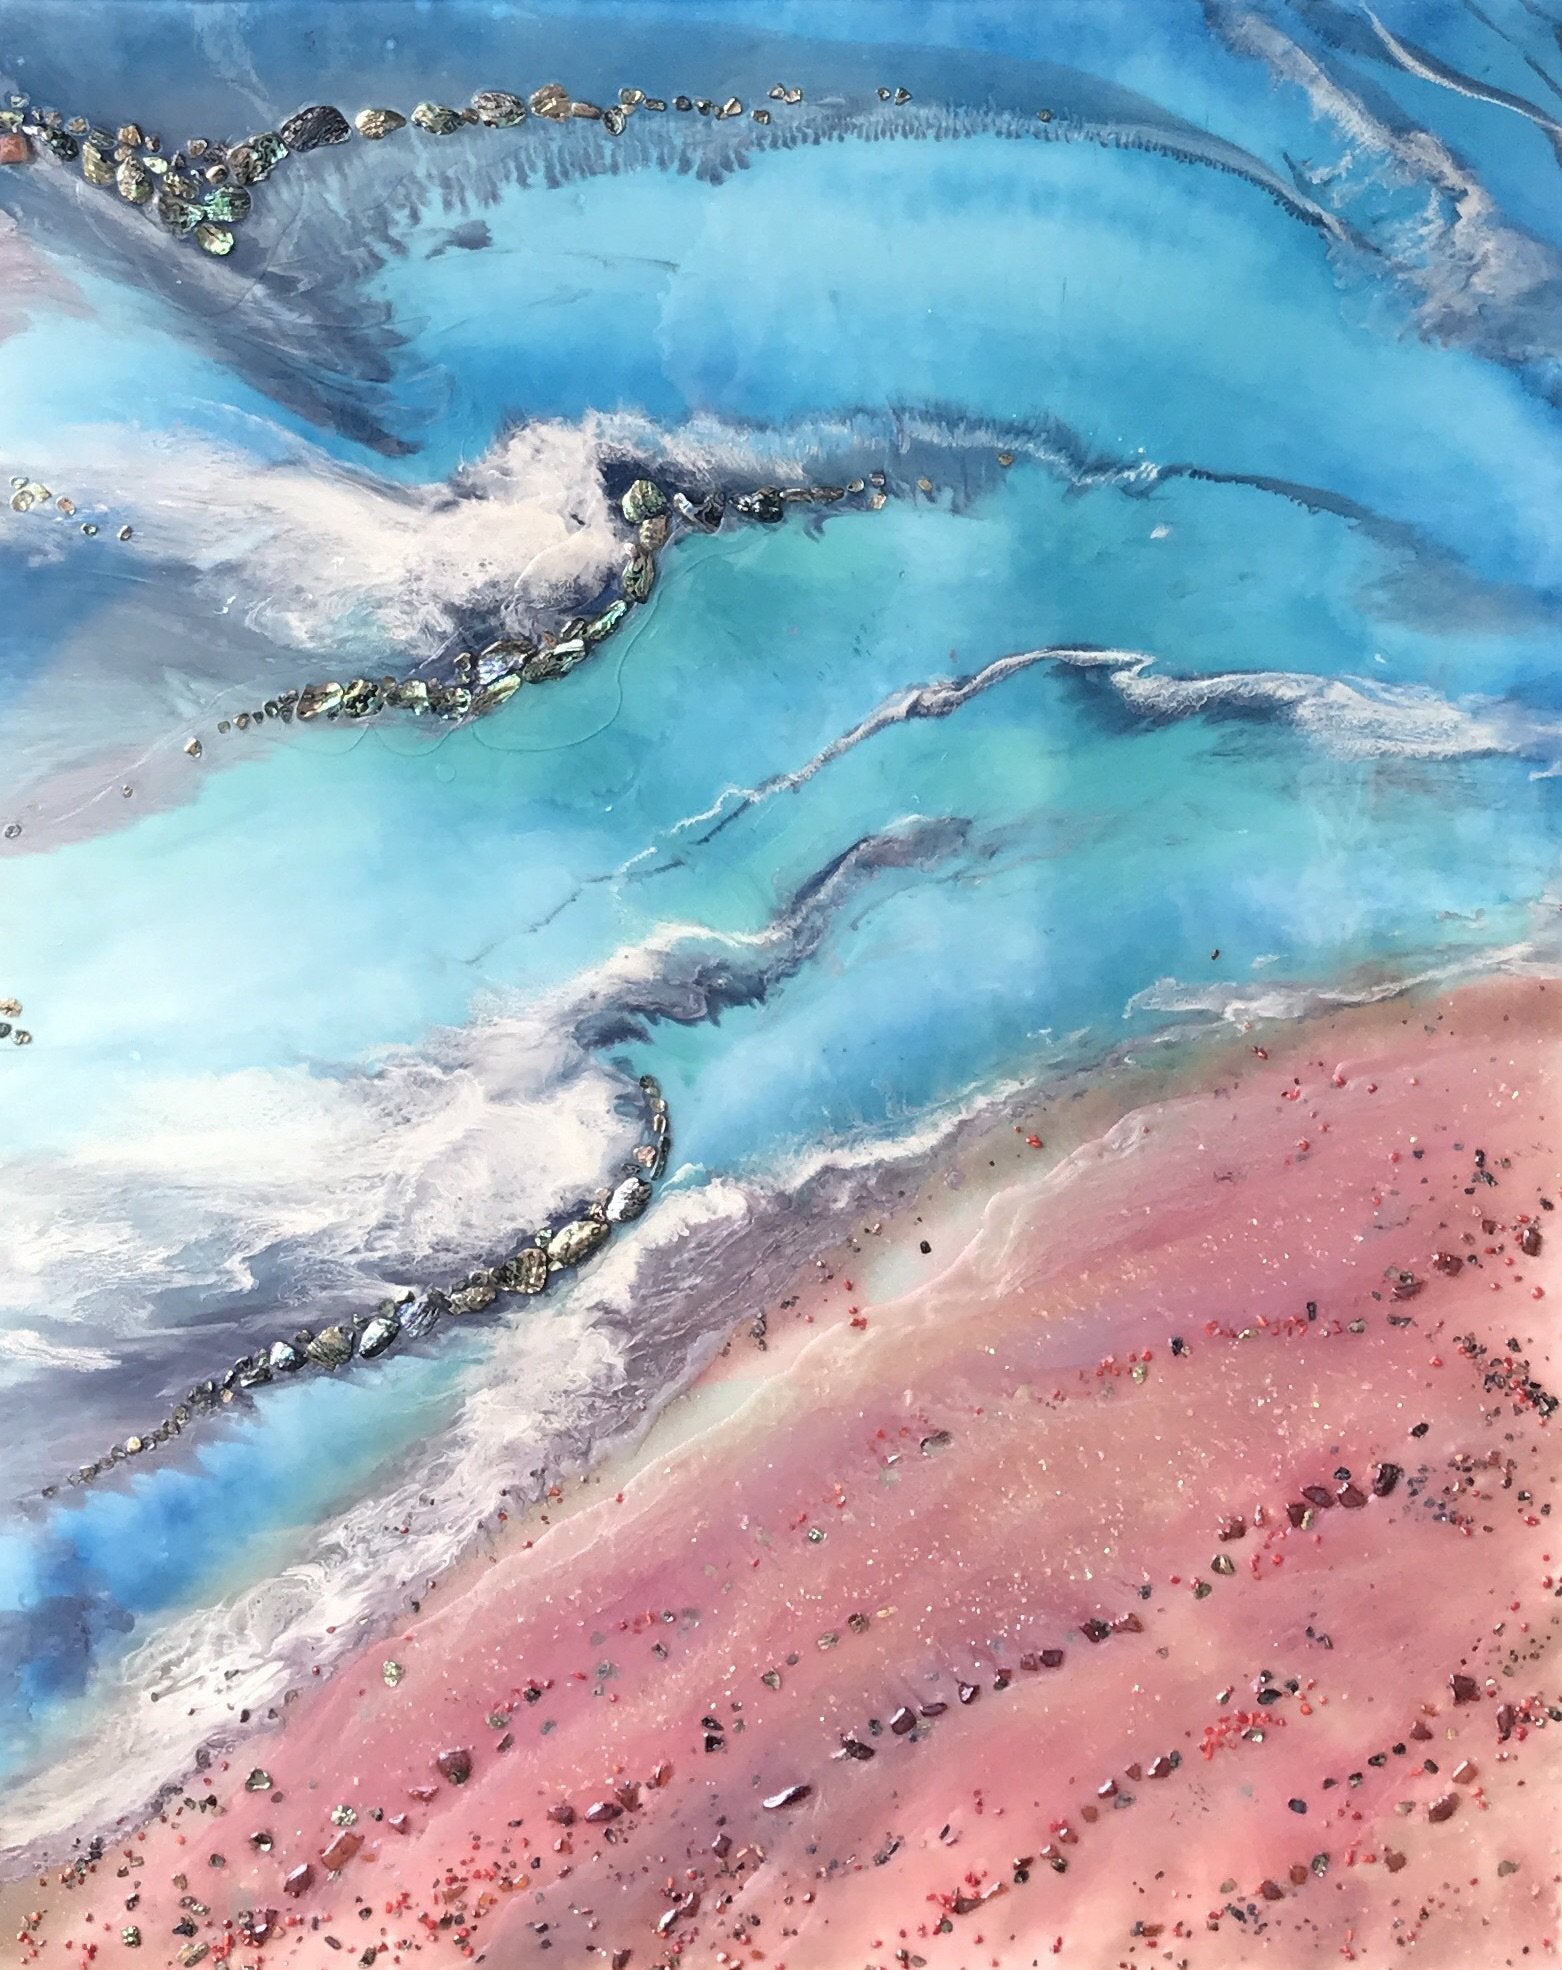 Azure Coastline. Abstract Ocean. Original Artwork with Abalone Shells and Coral 120x150cm.